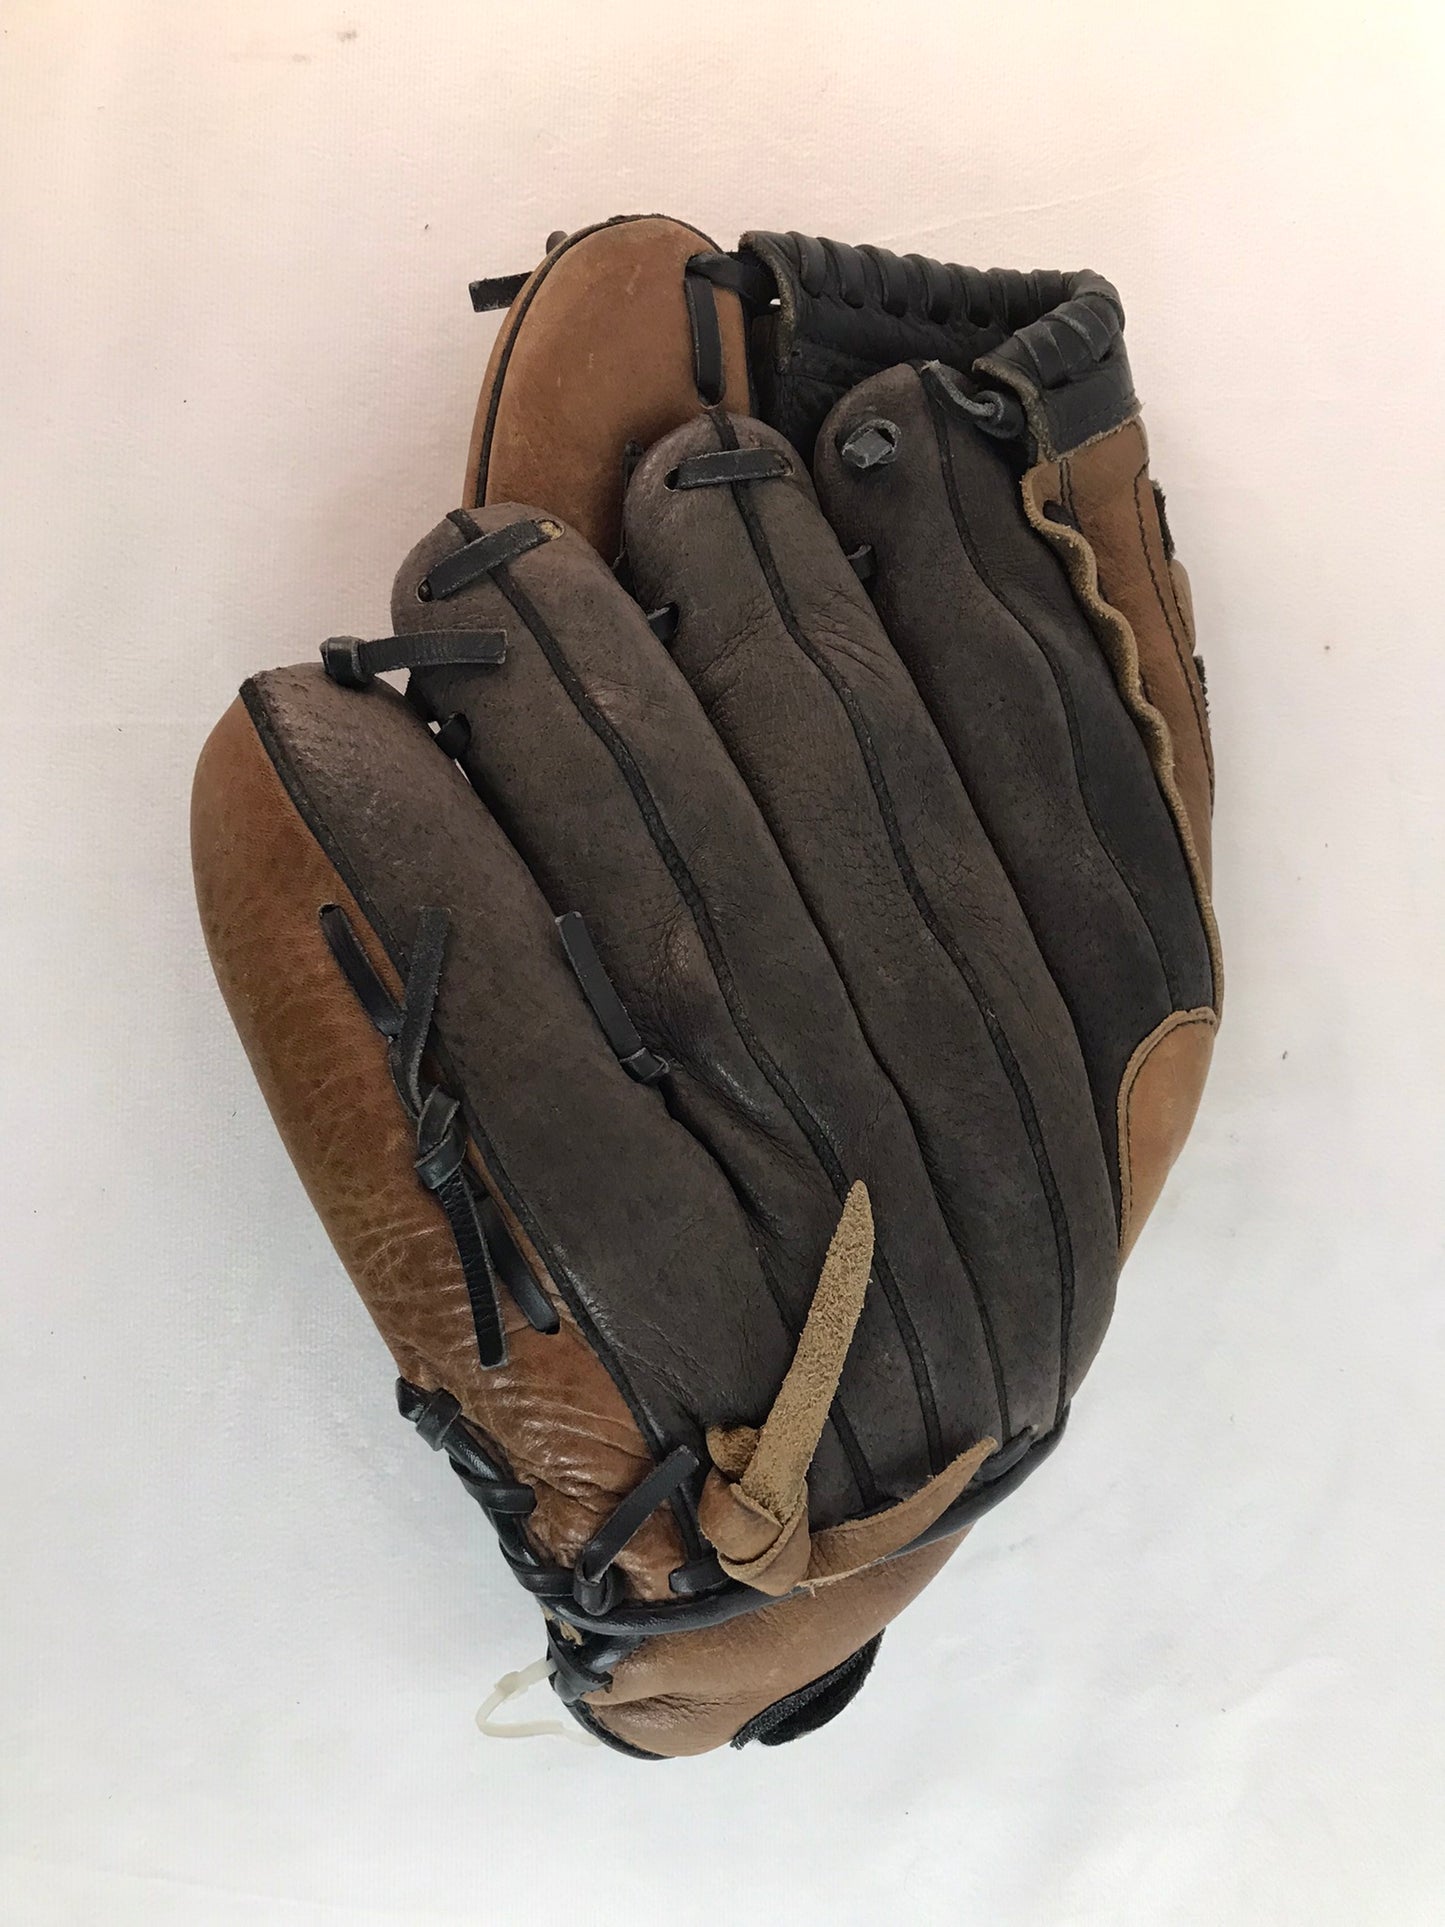 Baseball Glove Adult Size 13  inch Miken Soft Leather Black Brown Fits on Left Hand Outstanding Quality